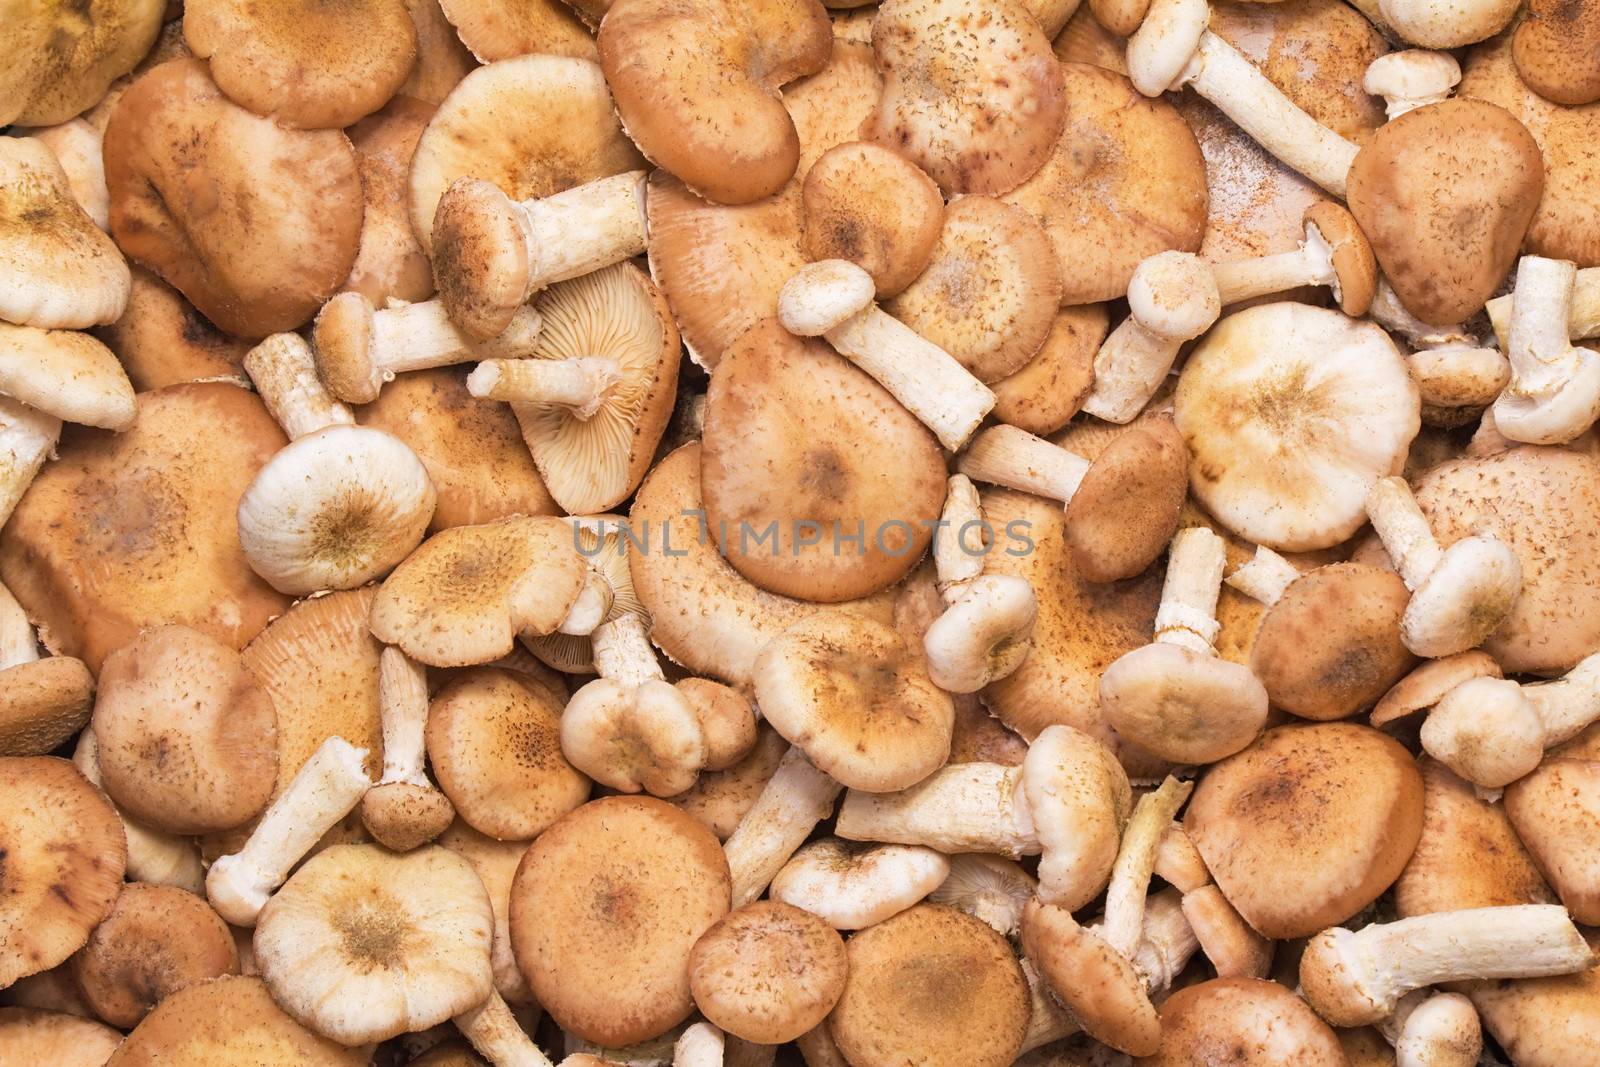 Different in size and shape, strong and benign mushrooms estimate.